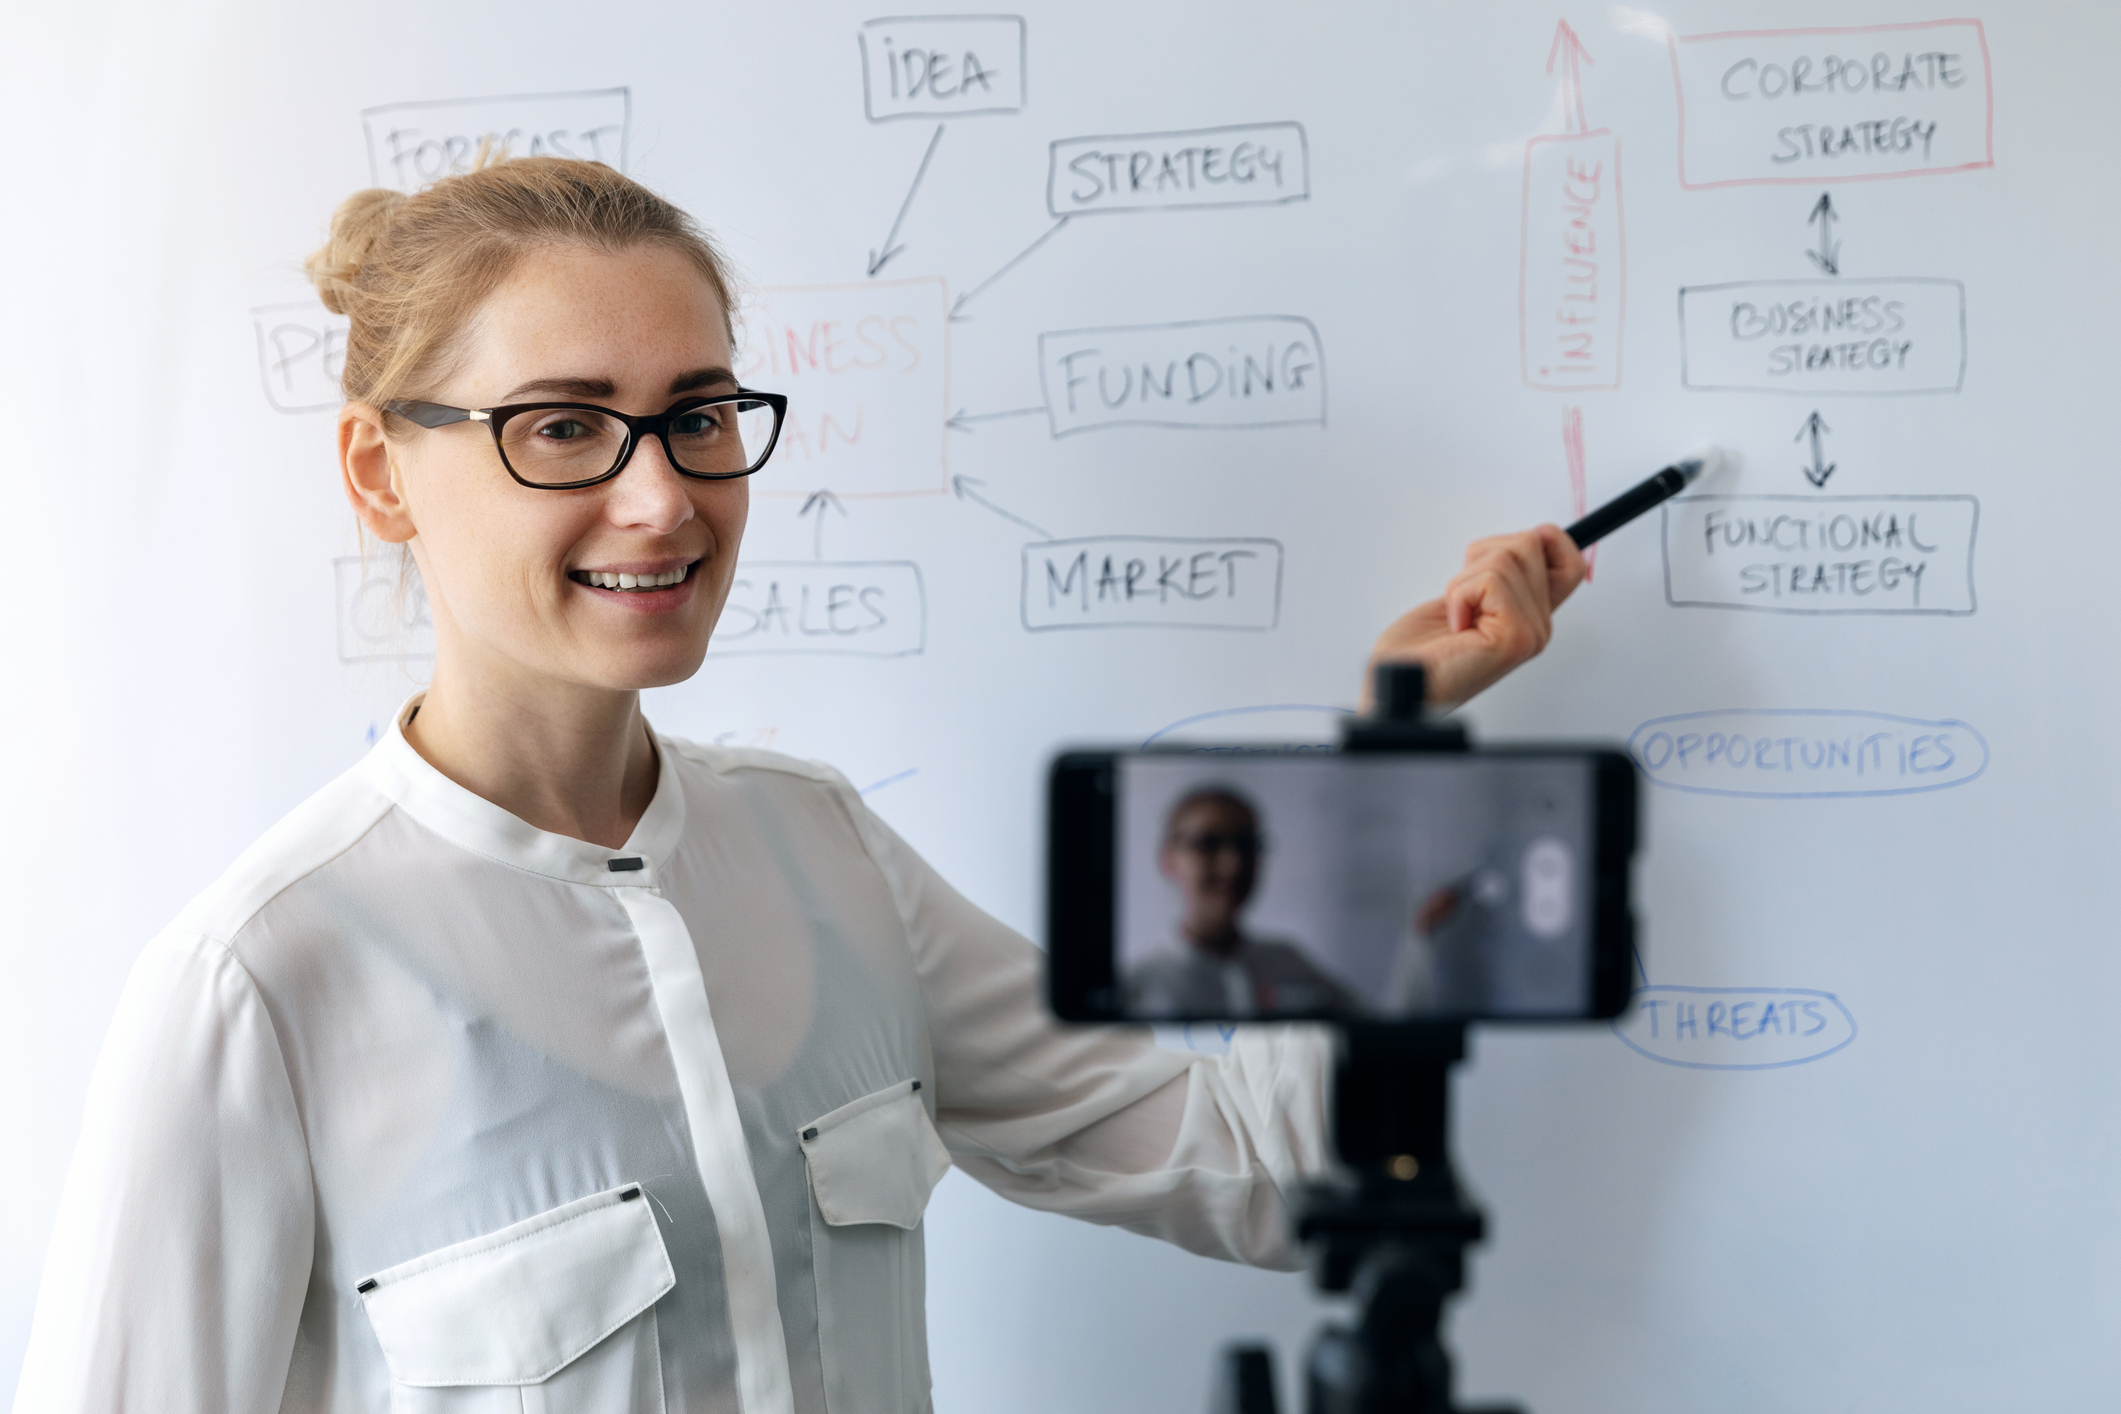 woman pointing to whiteboard while on camera for leveraging whiteboards concept